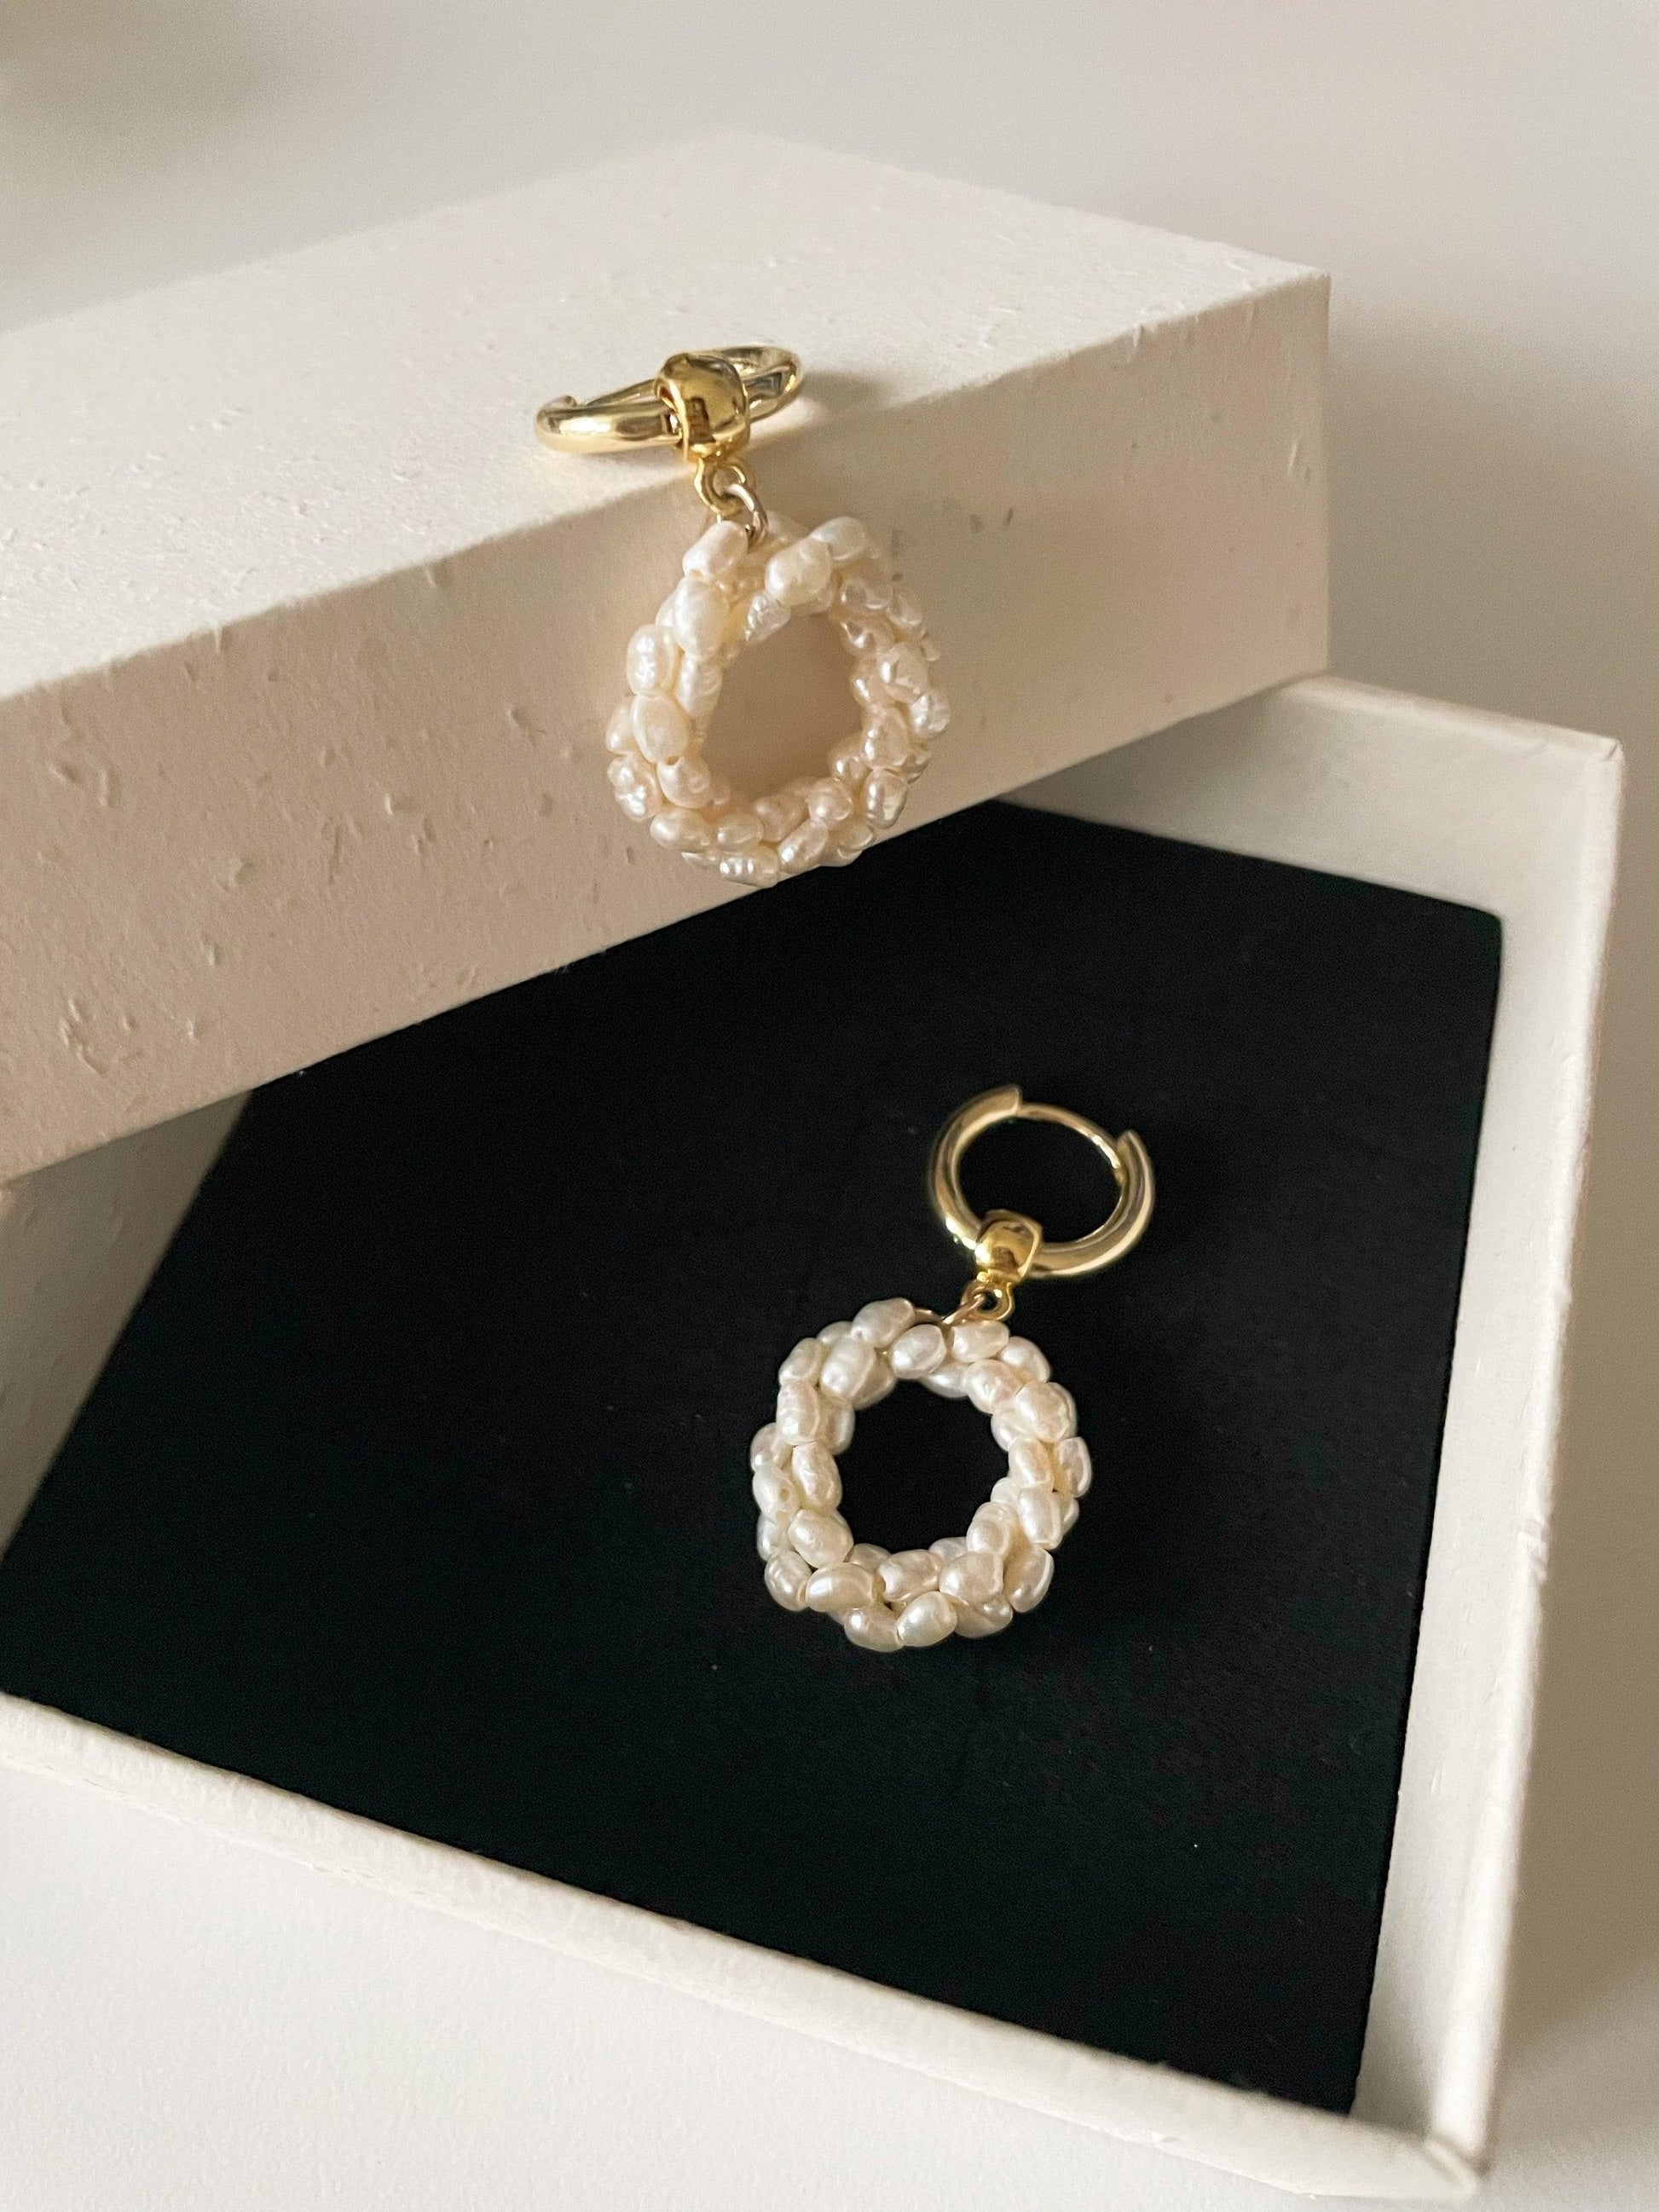 Elegant twisted pearl earrings in 14K gold and freshwater rice pearls - LE´TIAN